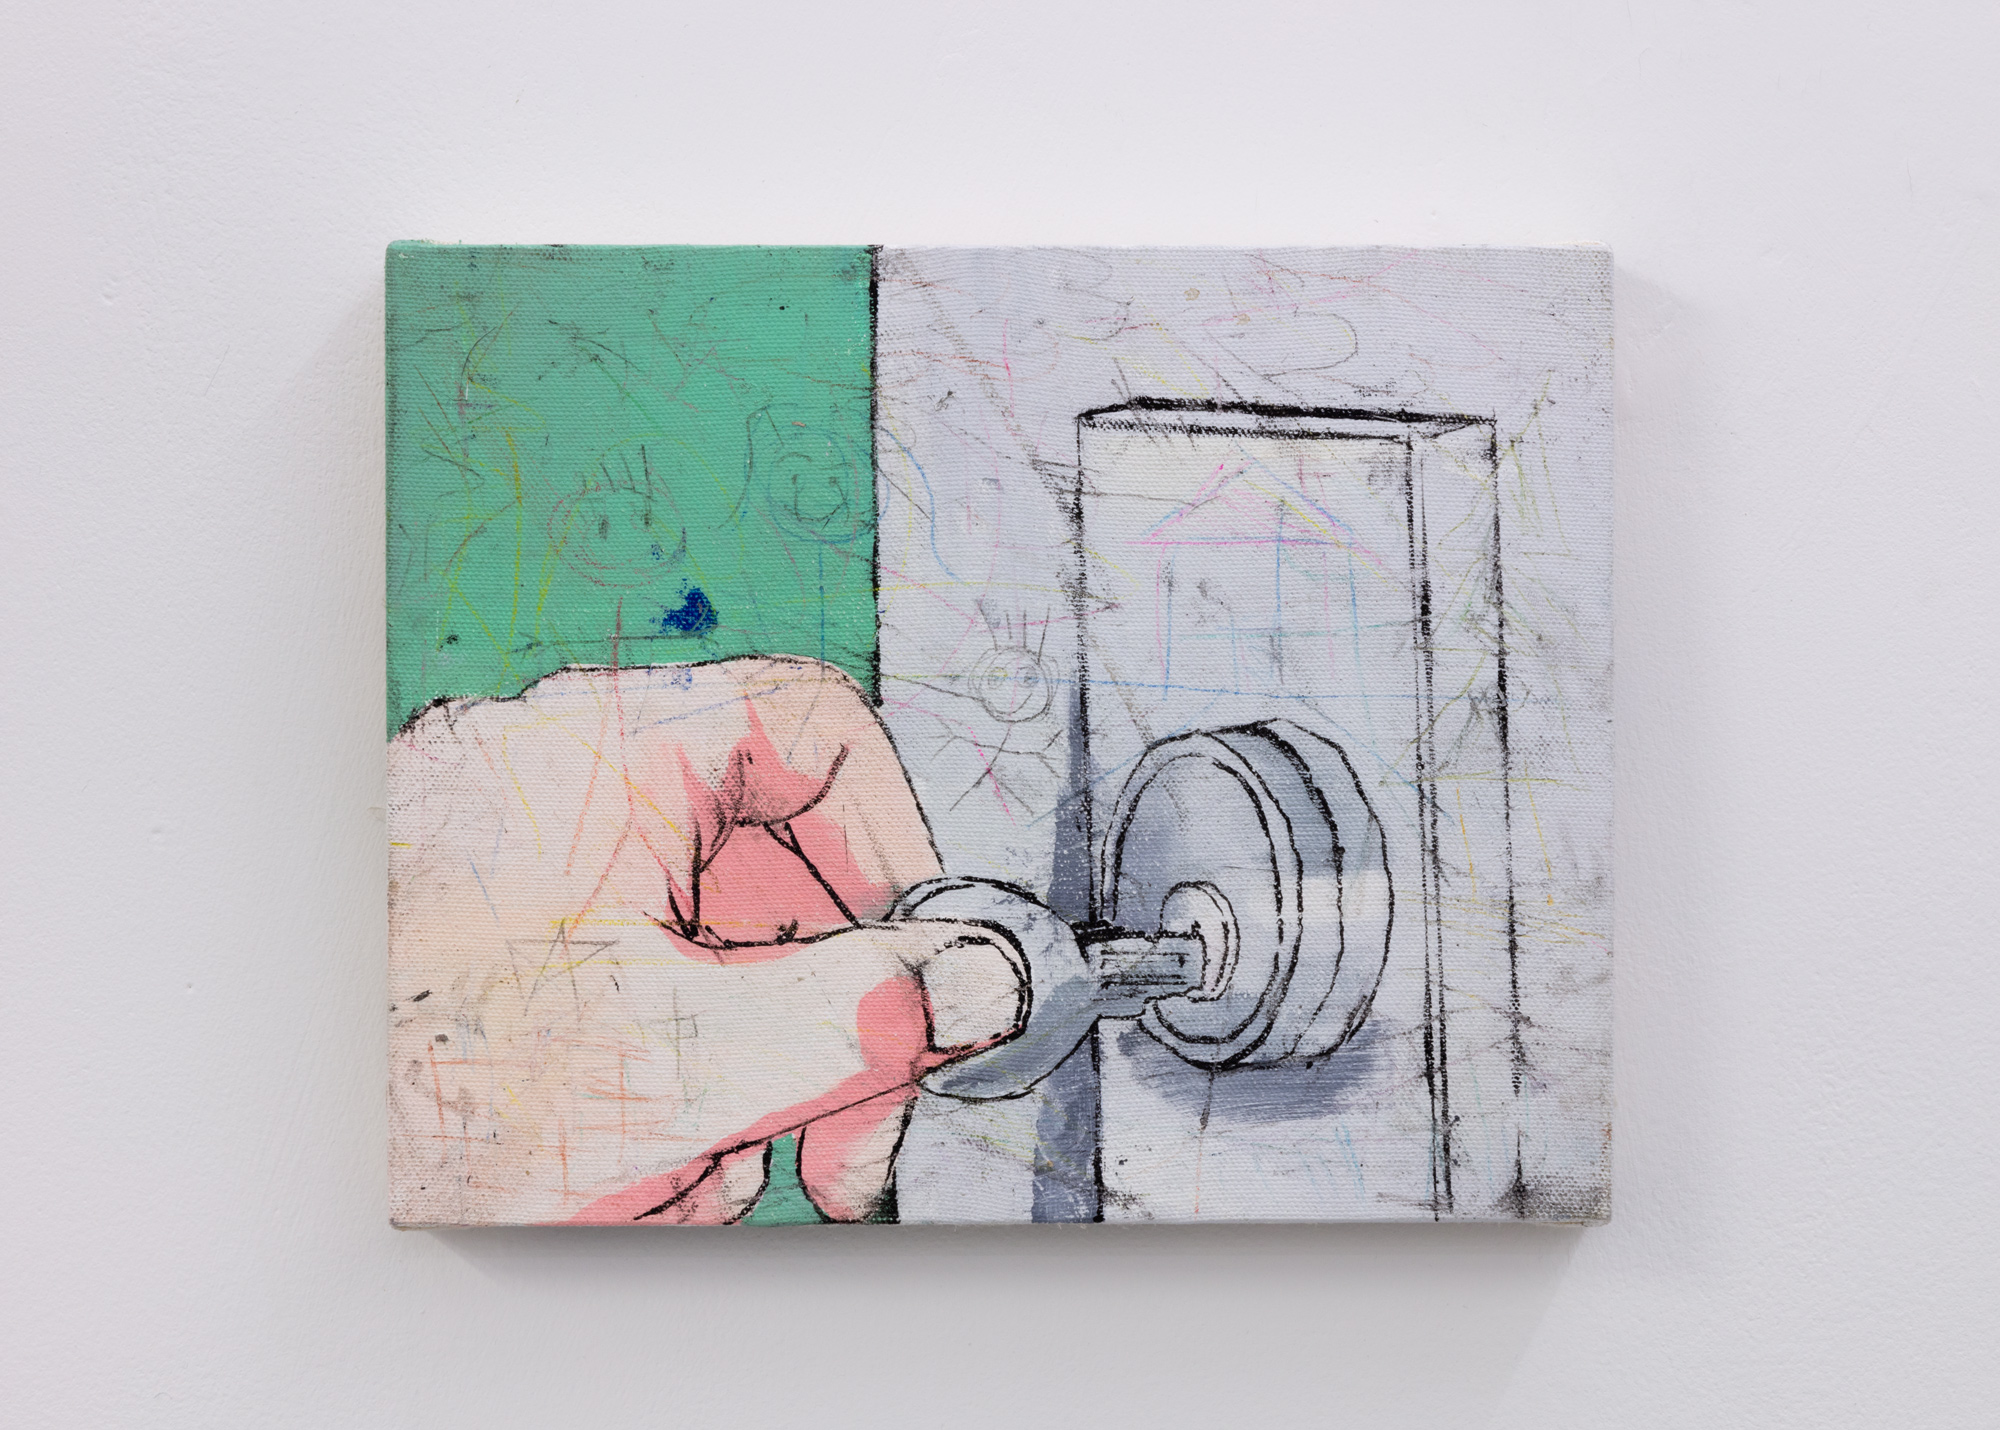  Vincent Larouche,  Untitled (Key) , 2019, Oil on canvas over panel, 8 x 10 in (21 x 25 cm) 